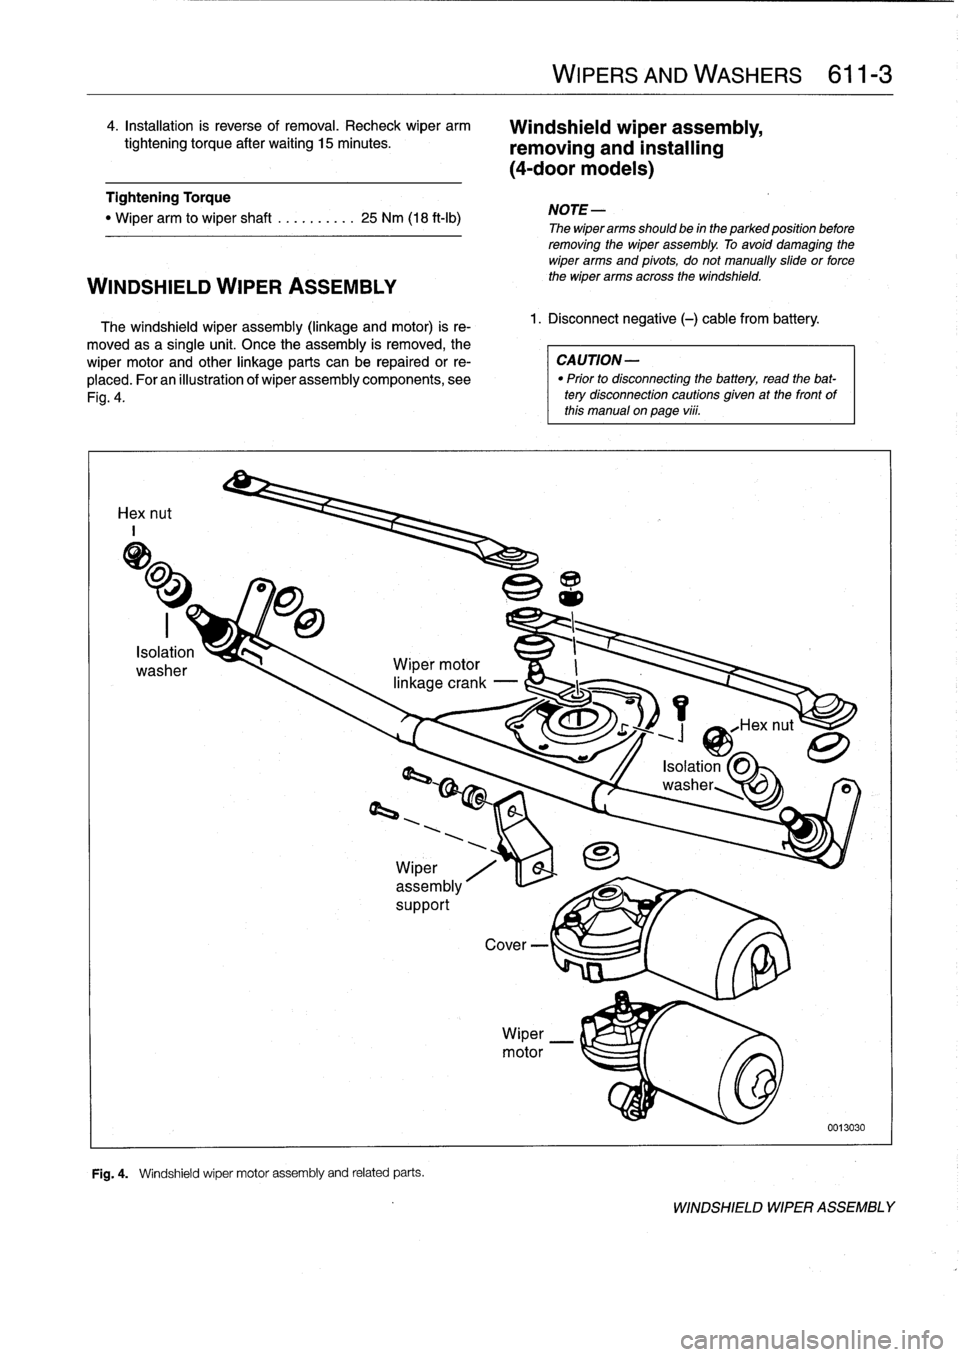 BMW 323i 1998 E36 Workshop Manual 
4
.
Installation
is
reverse
of
removal
.
Recheck
wiper
arm

tightening
torque
after
waiting
15minutes
.

Tightening
Torque

"
Wiper
arm
to
wiper
shaft
..........
25
Nm
(18
ft-Ib)

WINDSHIELD
WIPER
AS